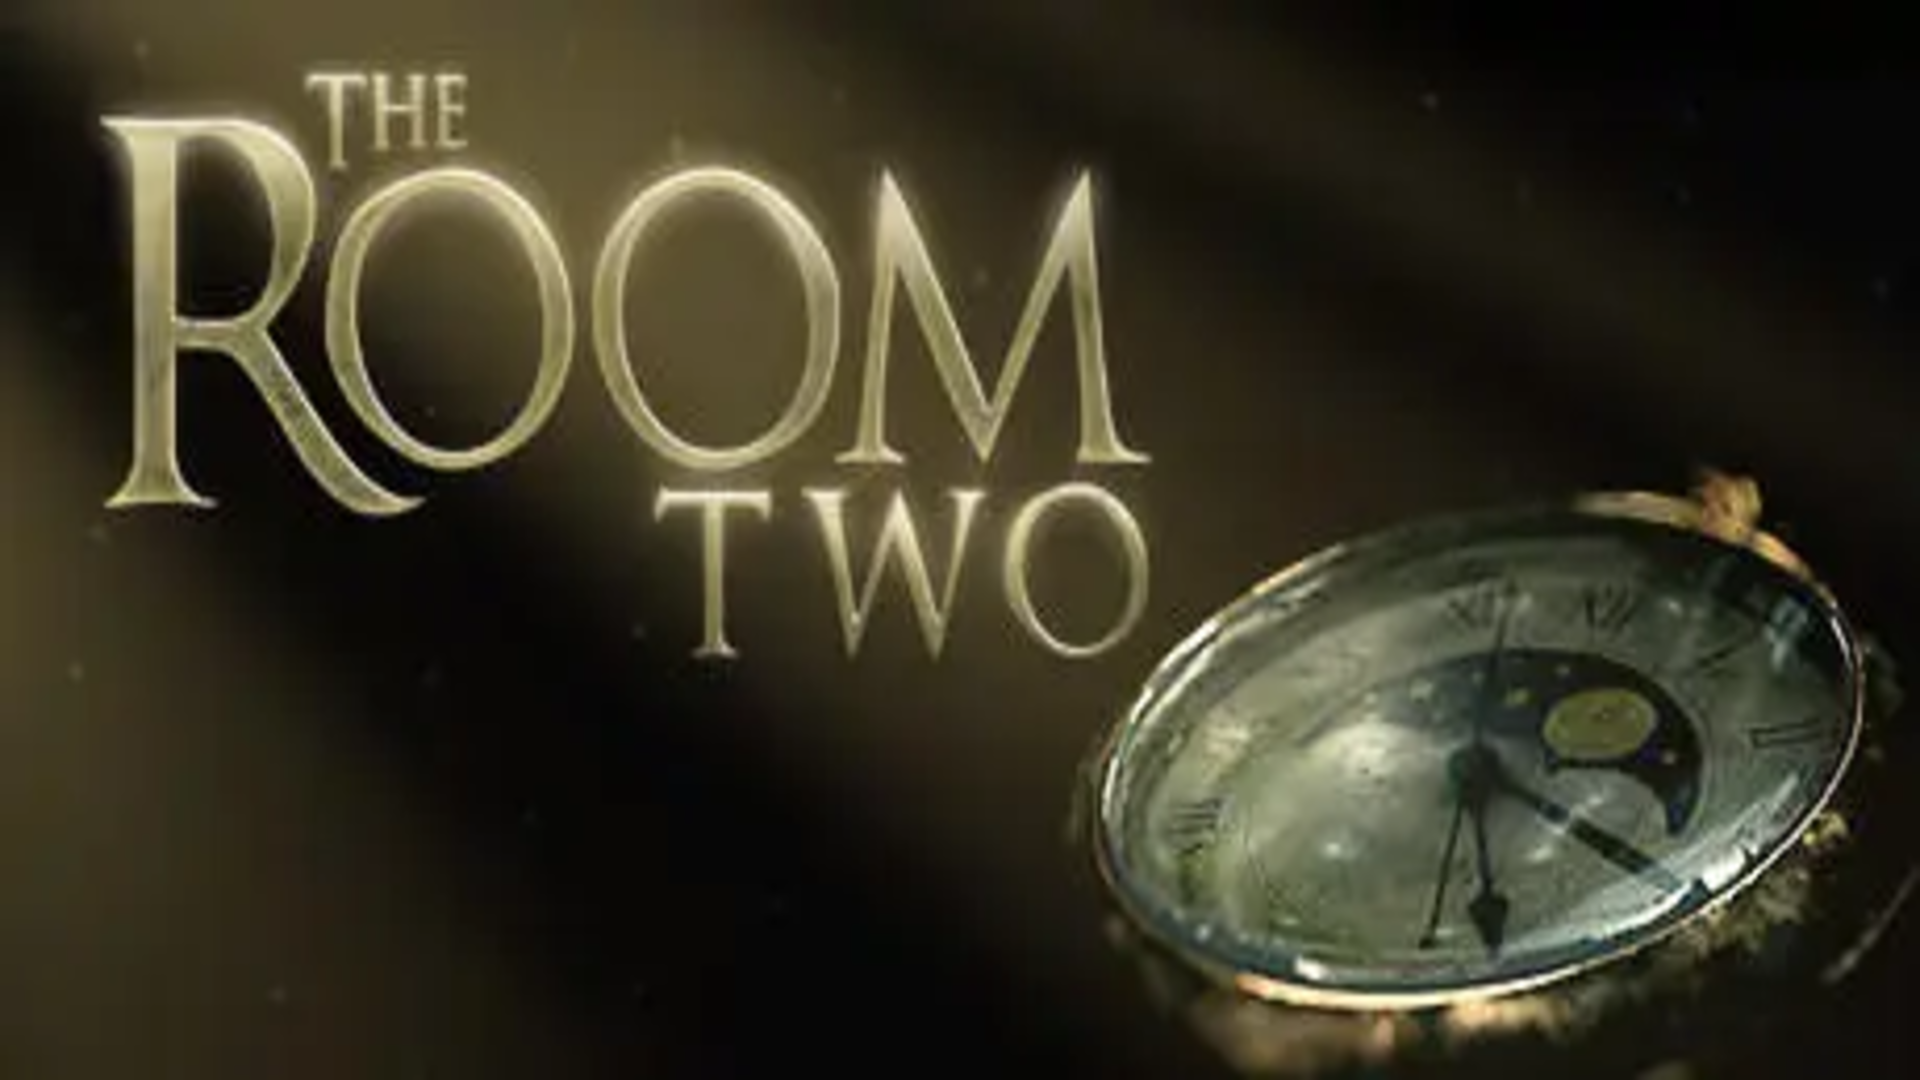 Banner of The Room Two (더 룸 투) 